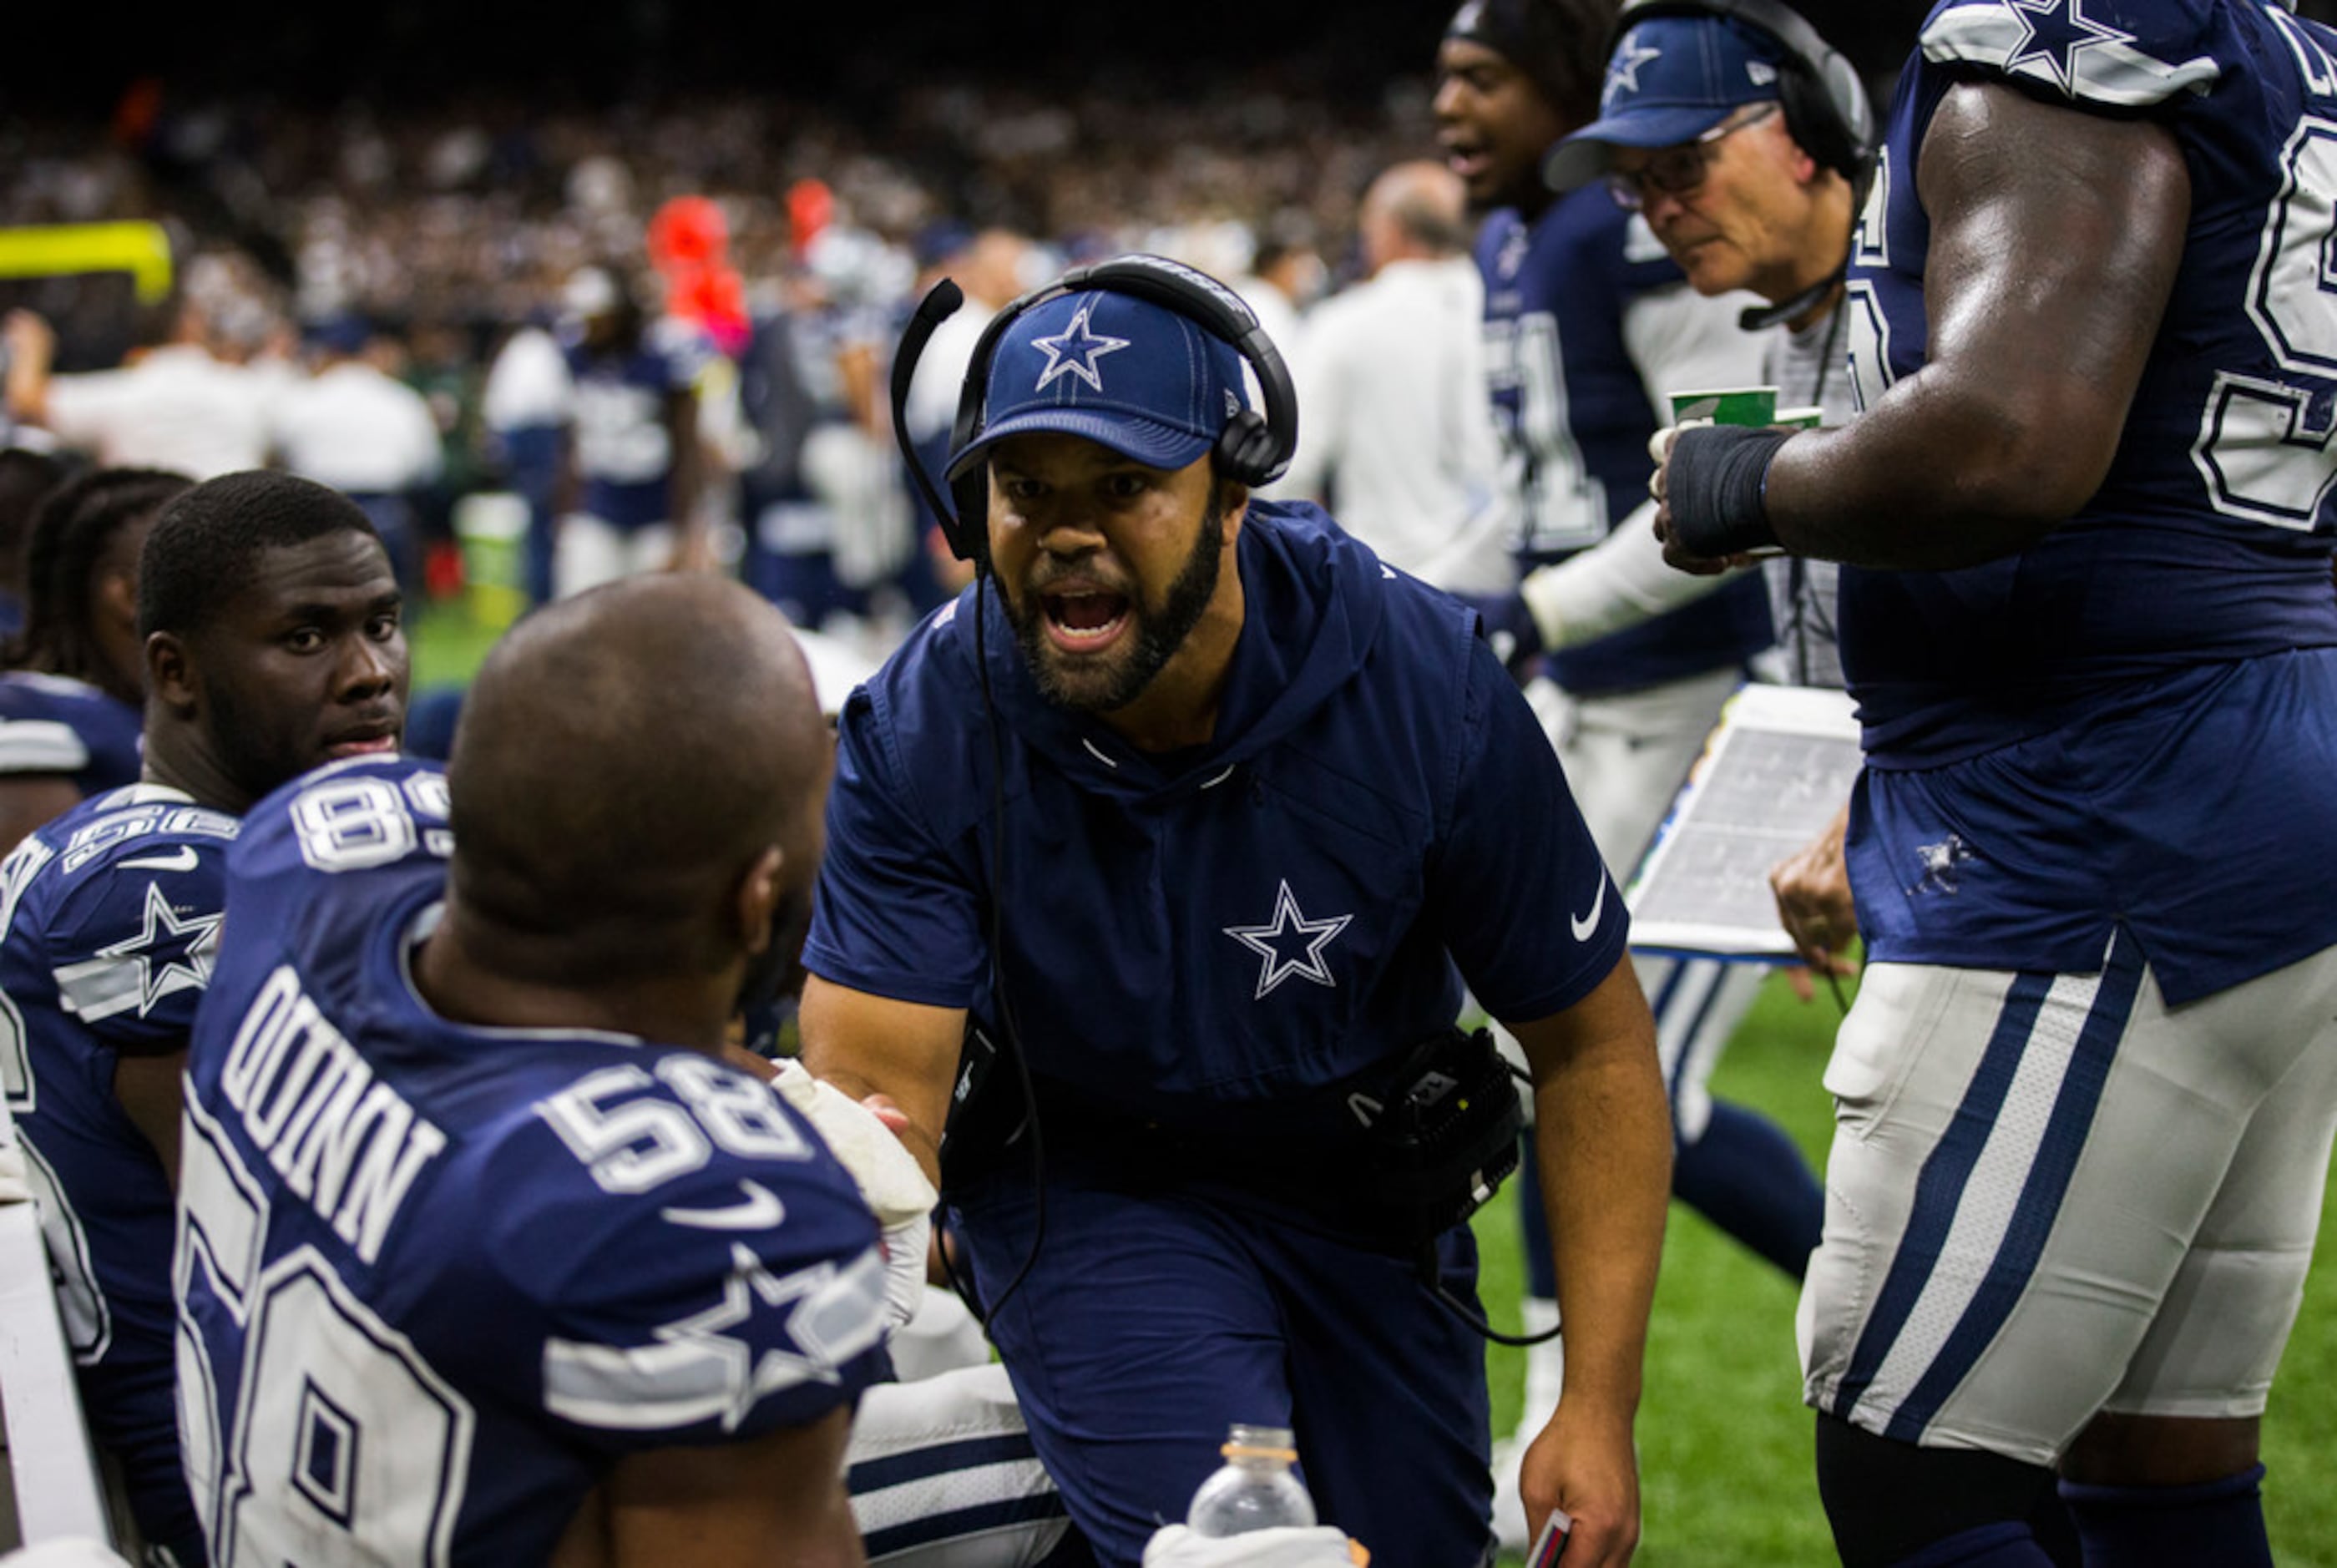 Dallas Cowboys passing game coordinator and defensive backs coach Kris Richard (center) and...